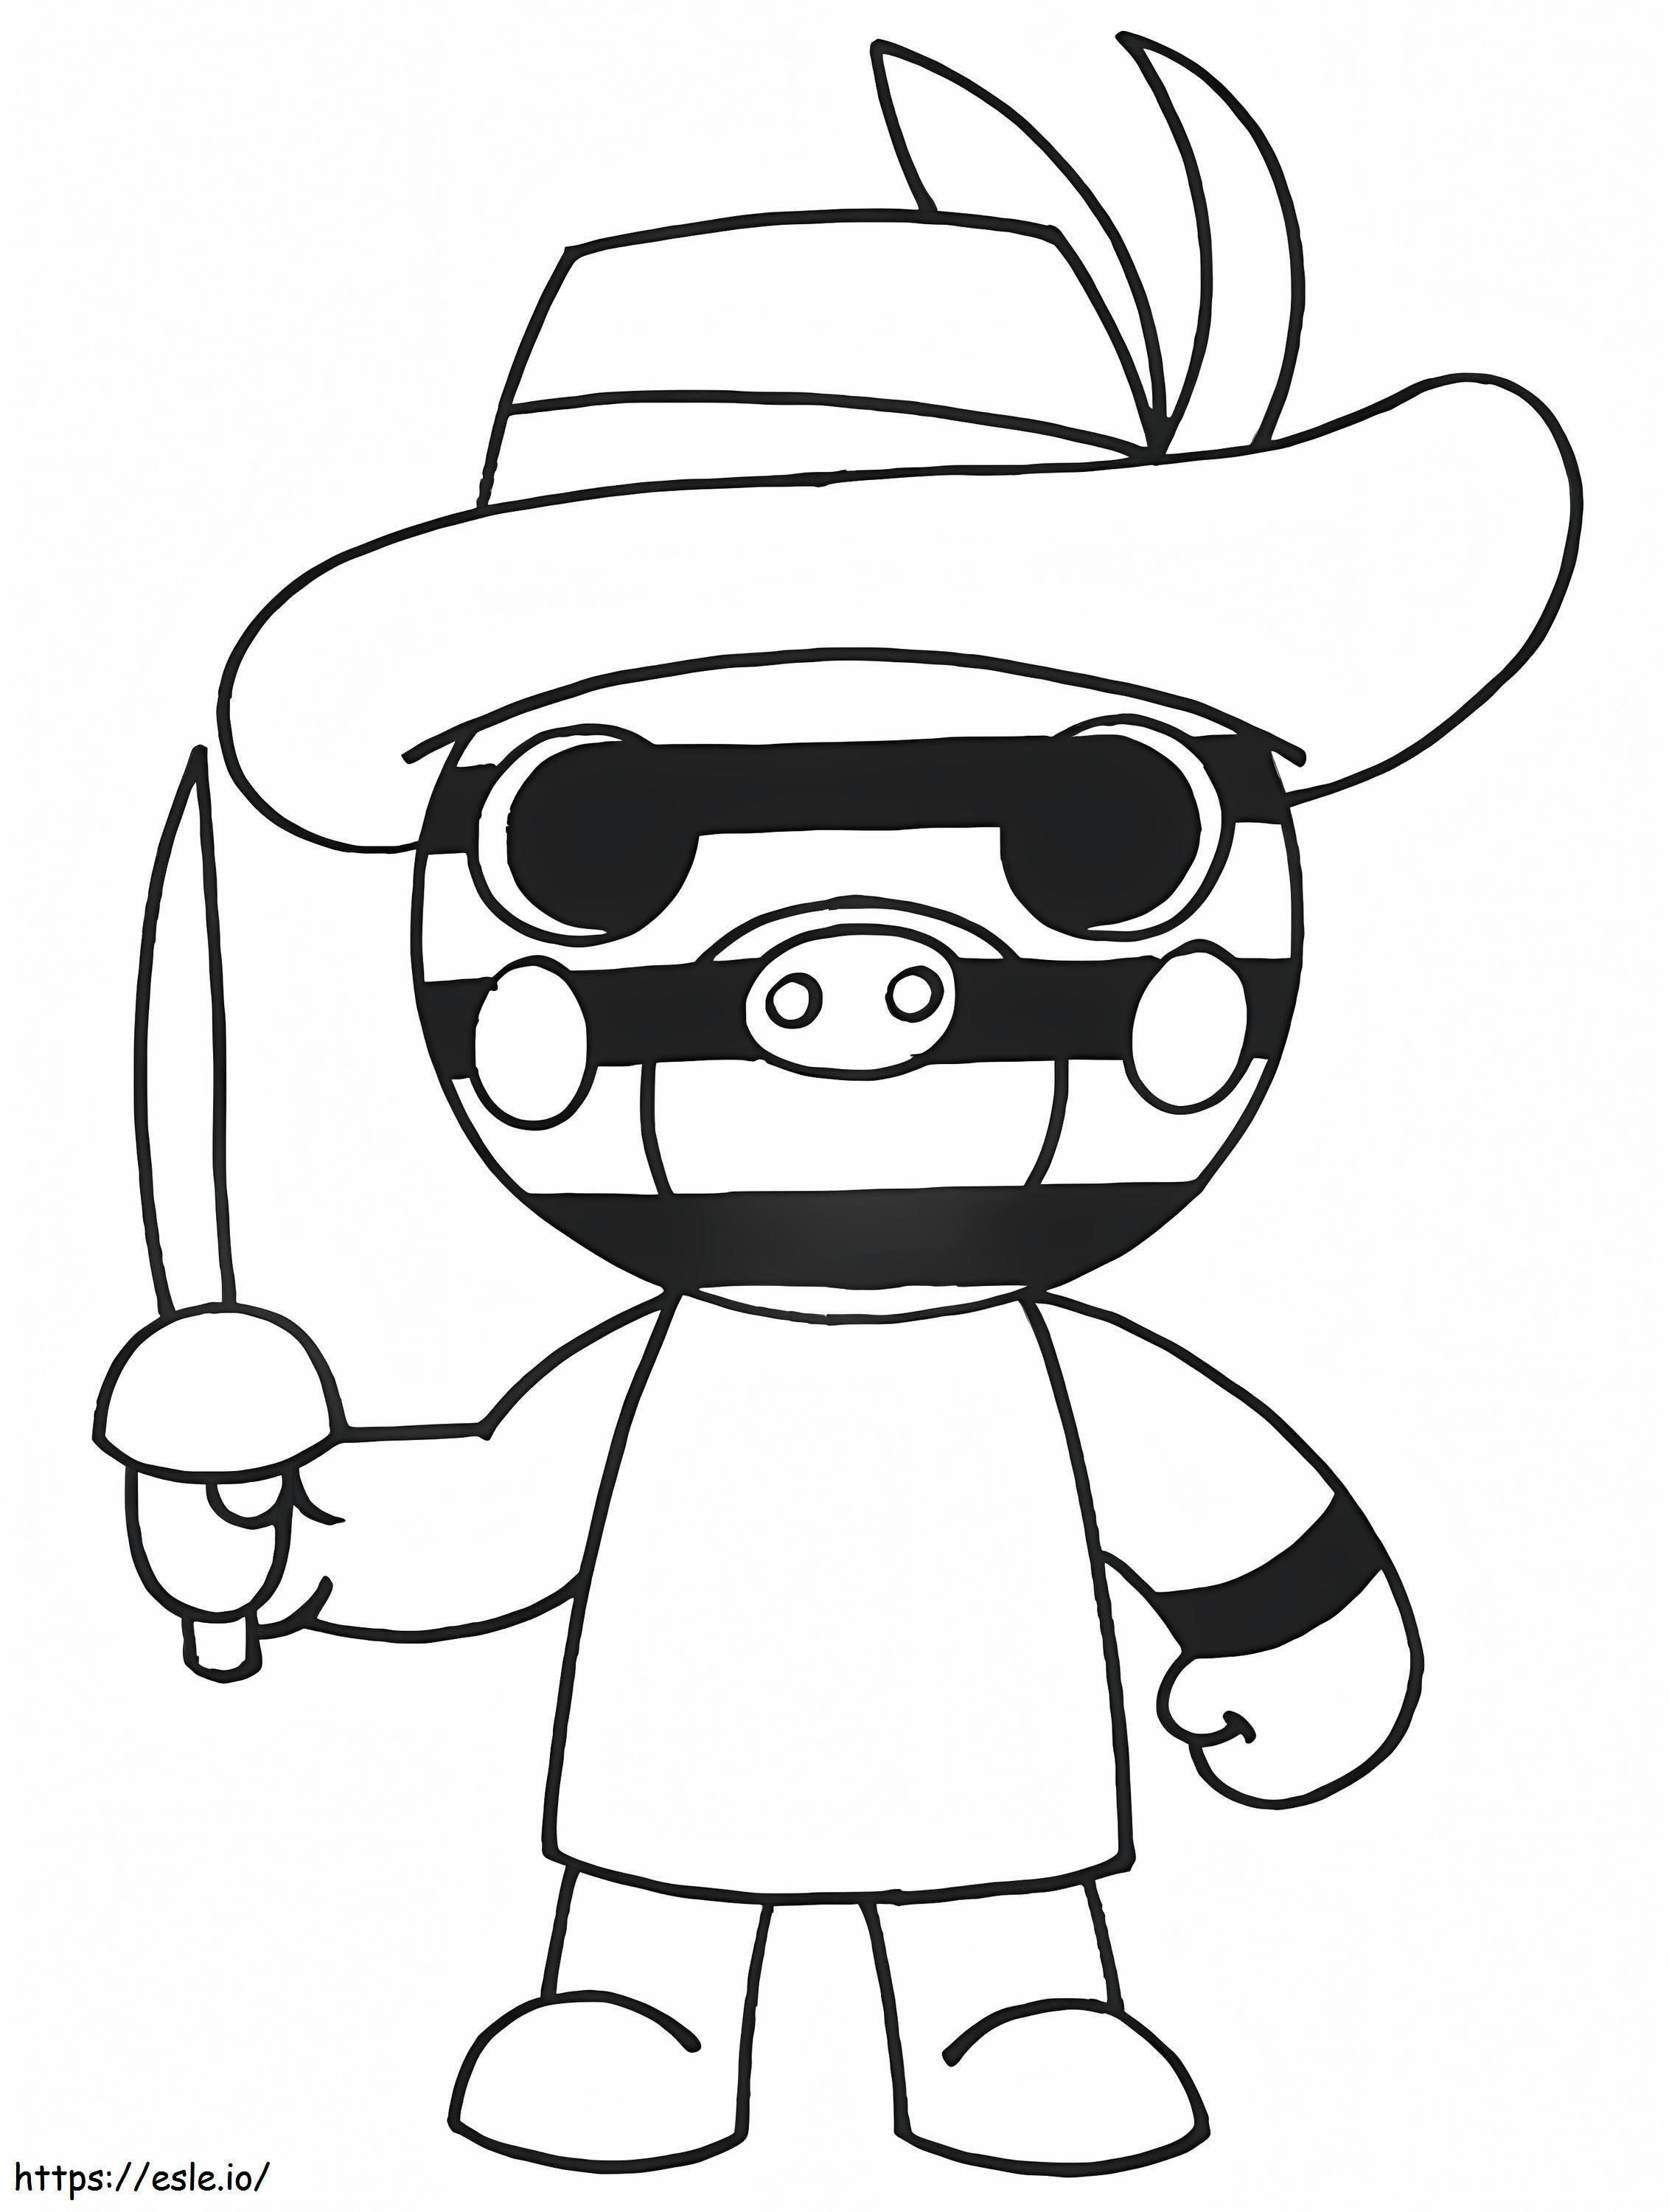 Zizzy Piggy Roblox coloring page